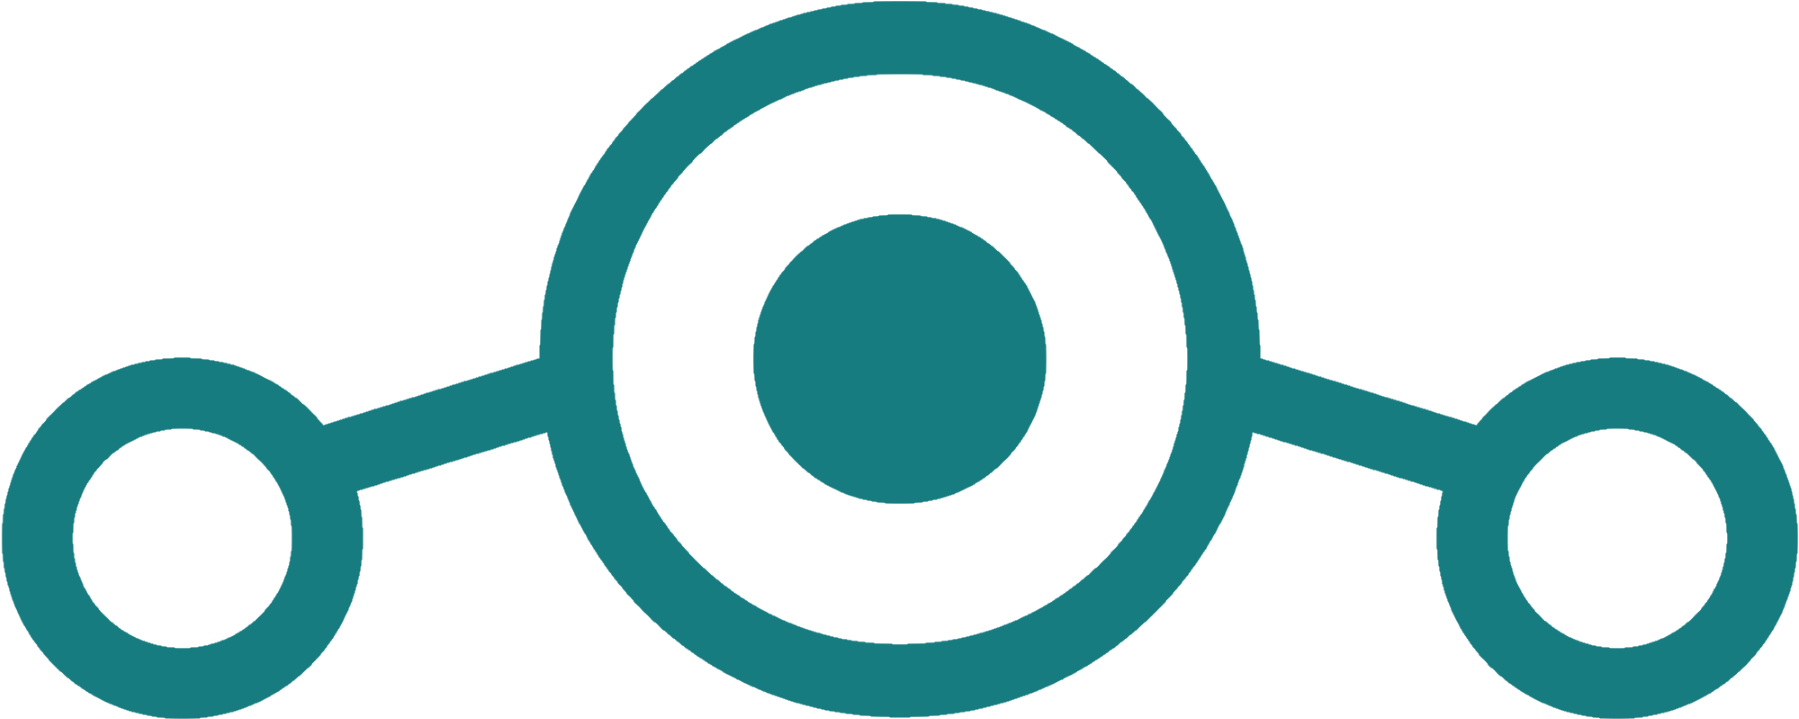 Lineage Os Logo - Lineage Os Logo Png (2000x1000), Png Download